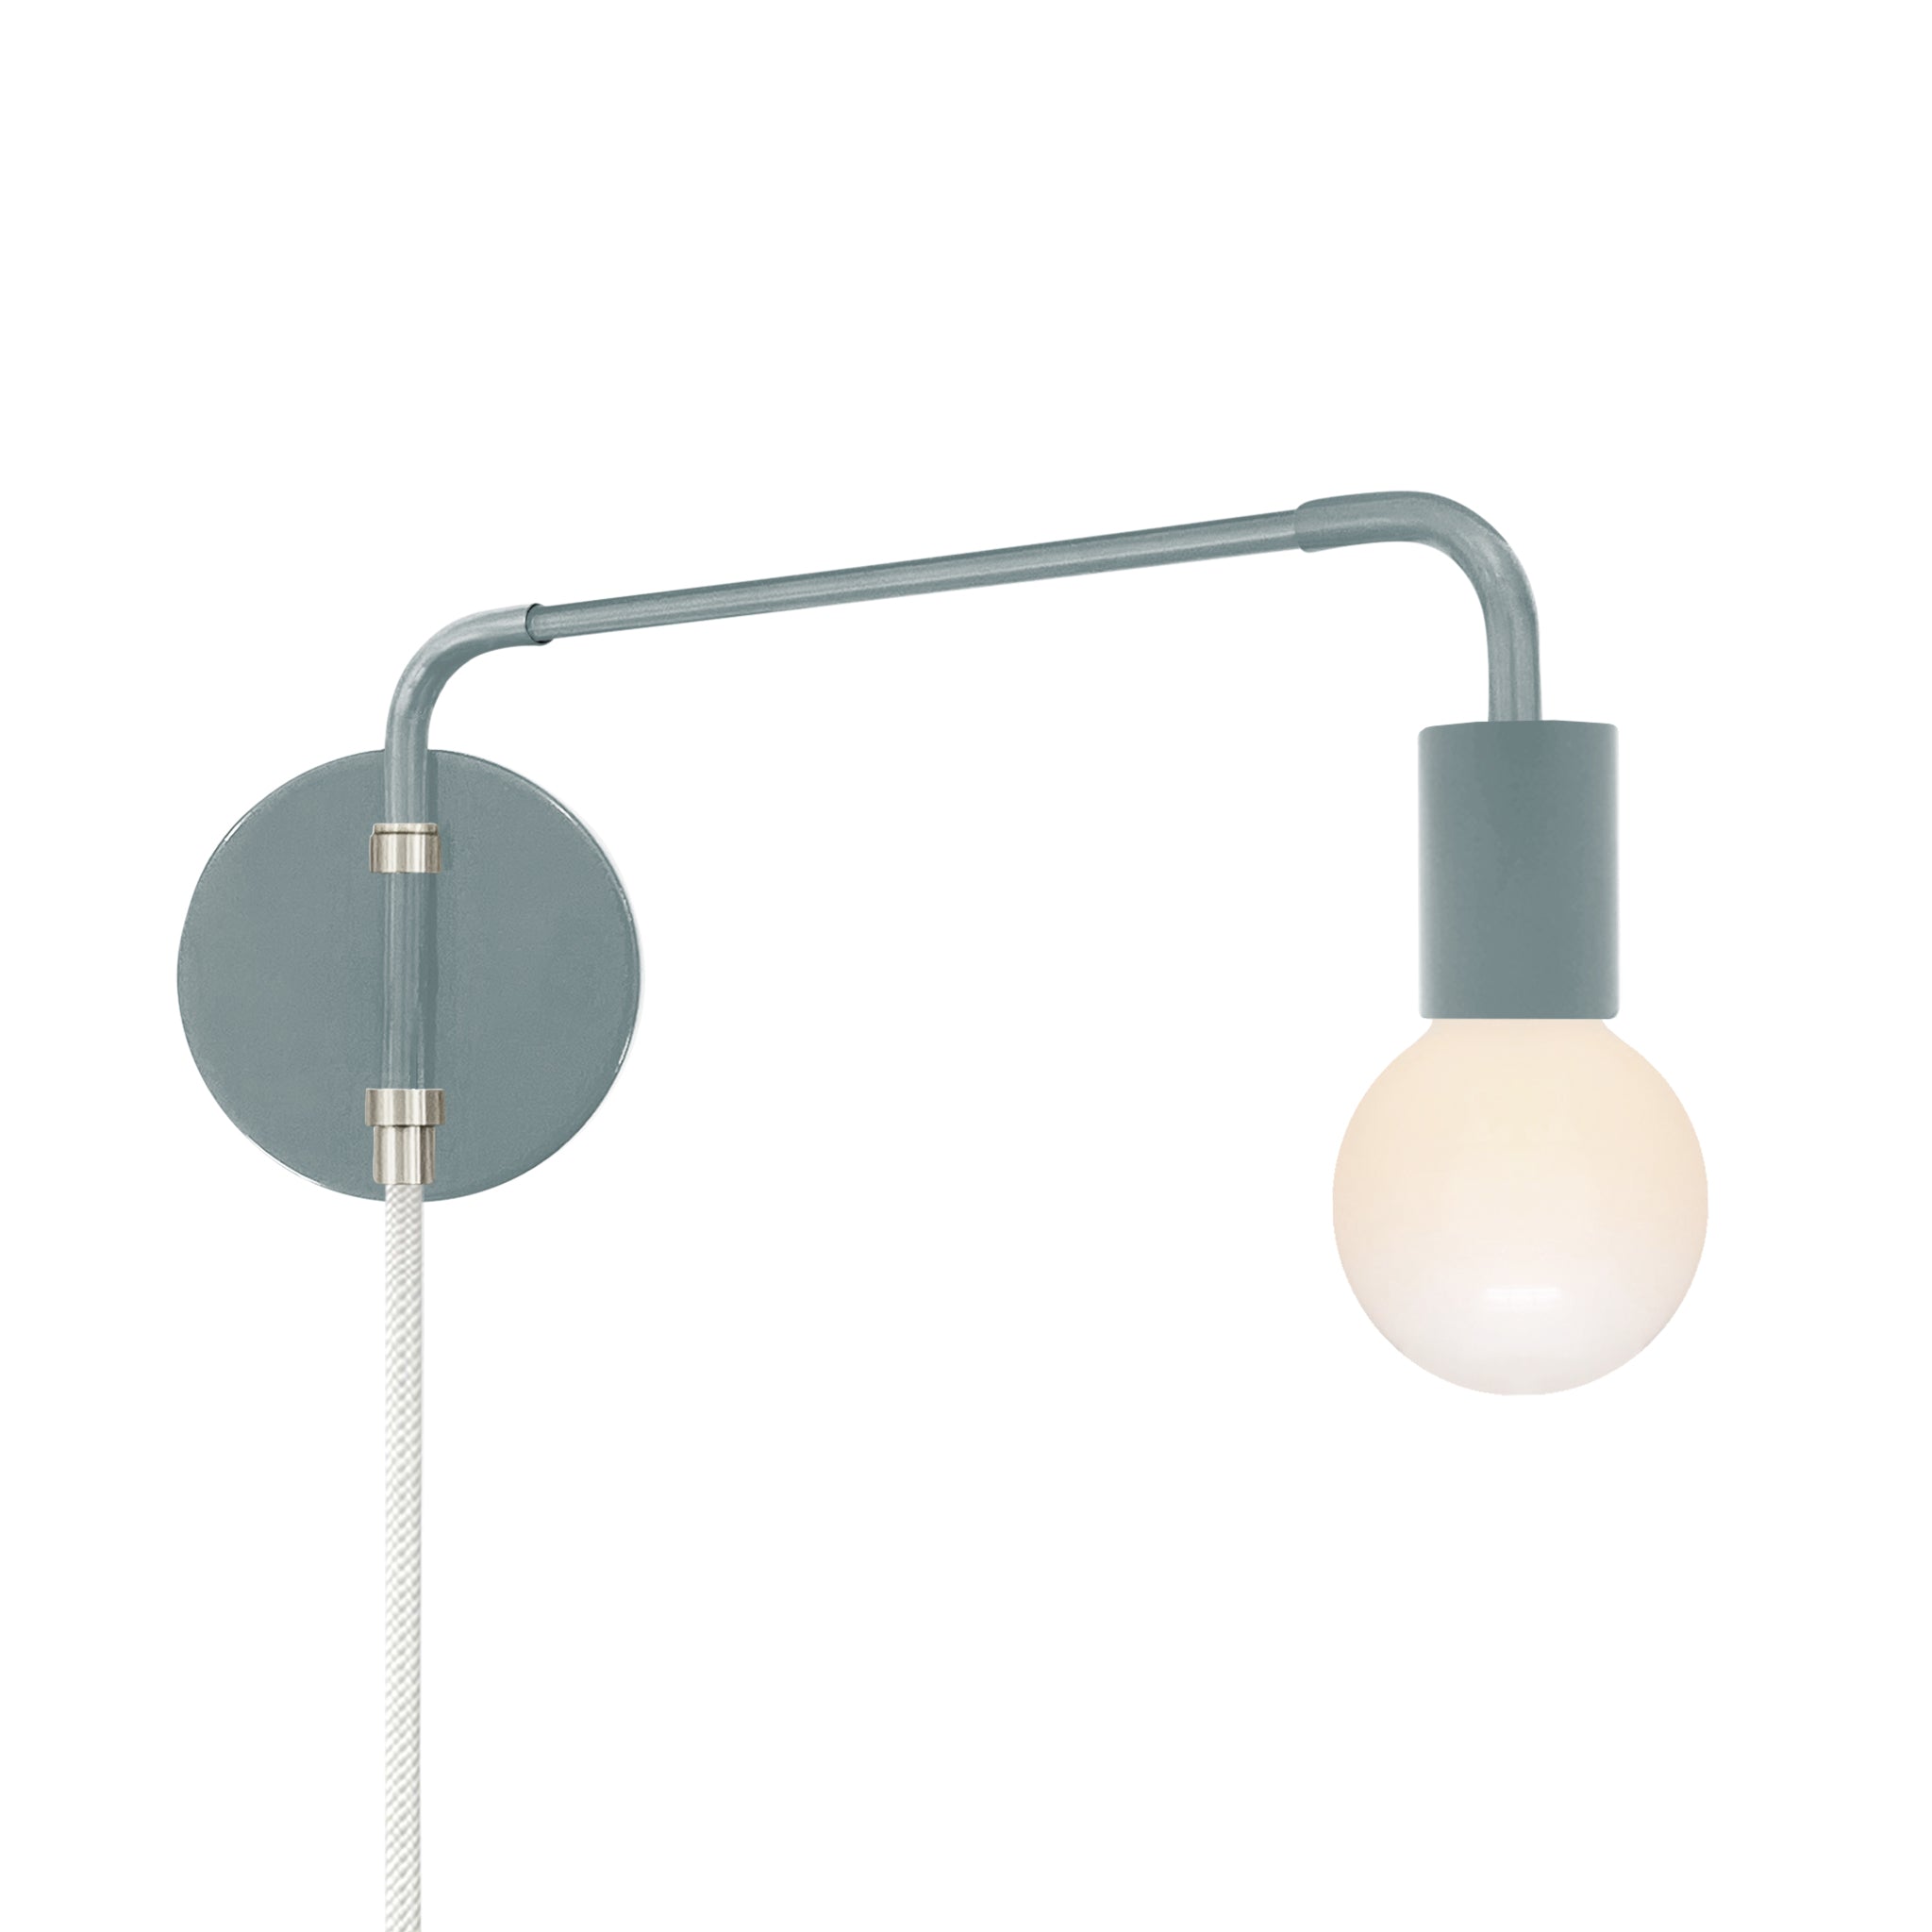 Nickel and python green color Sway plug-in sconce Dutton Brown lighting